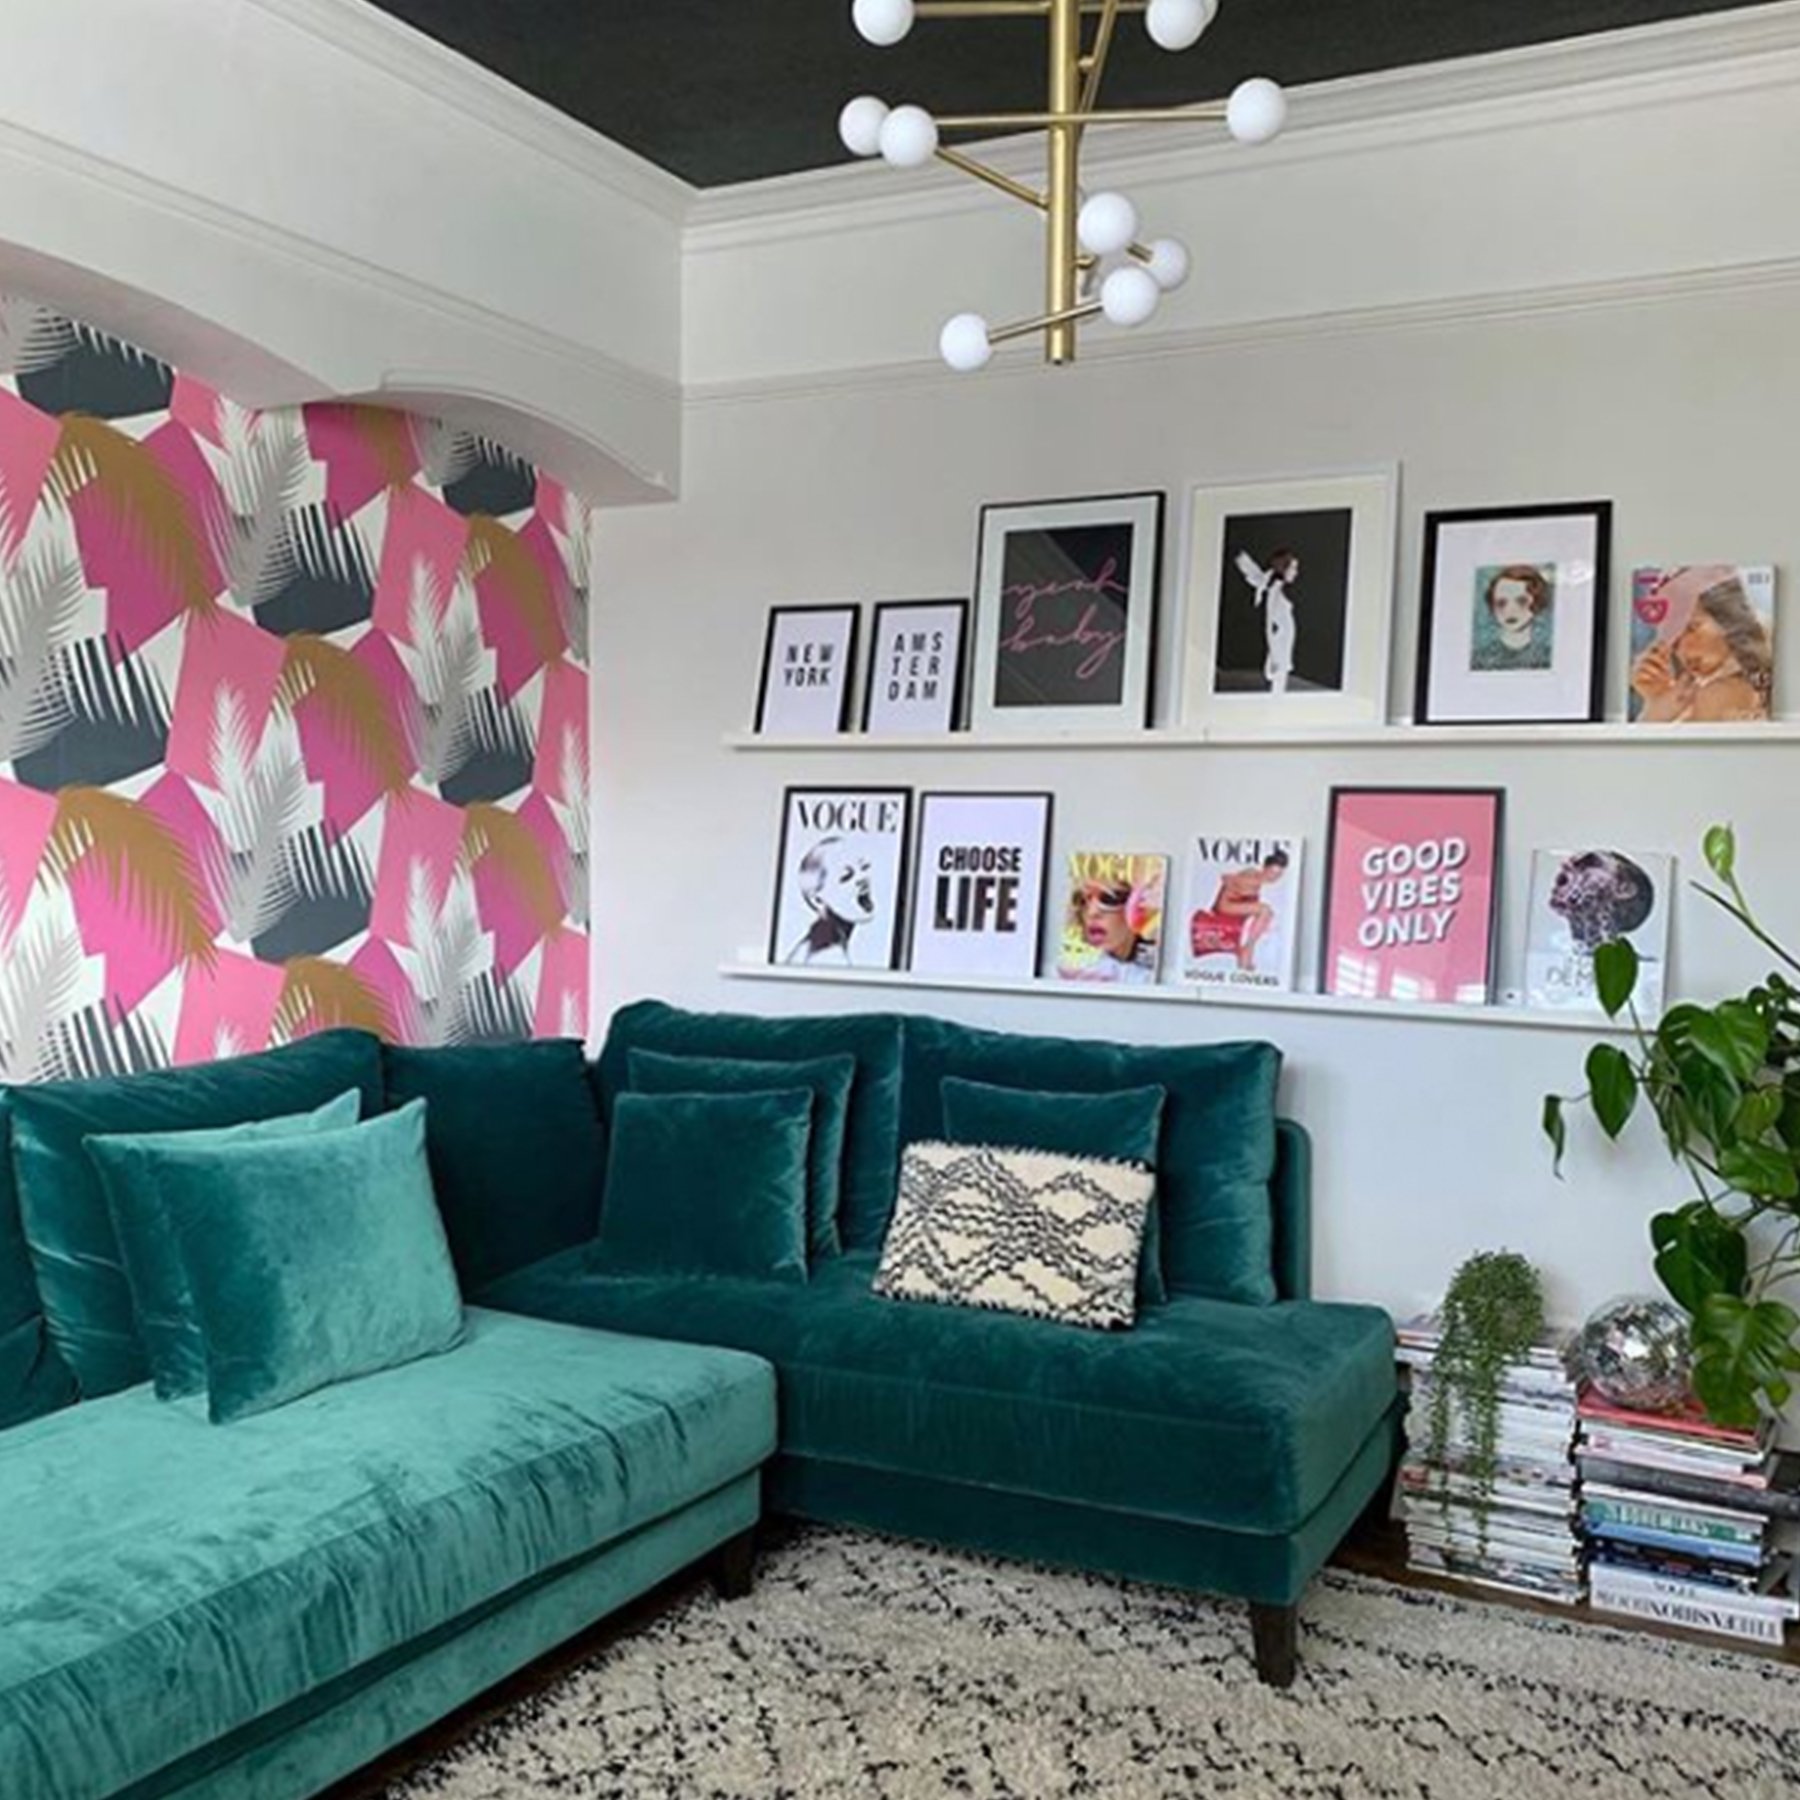 Vergevingsgezind Opstand Reis Love Your Home on Twitter: "The beautiful home of @_onehundredandtwelve  featuring the Grace corner sofa. #loveyourhome #velvetsofa #tealinteriors  https://t.co/XvDBjlh6nt https://t.co/GENU7T0TrR" / Twitter